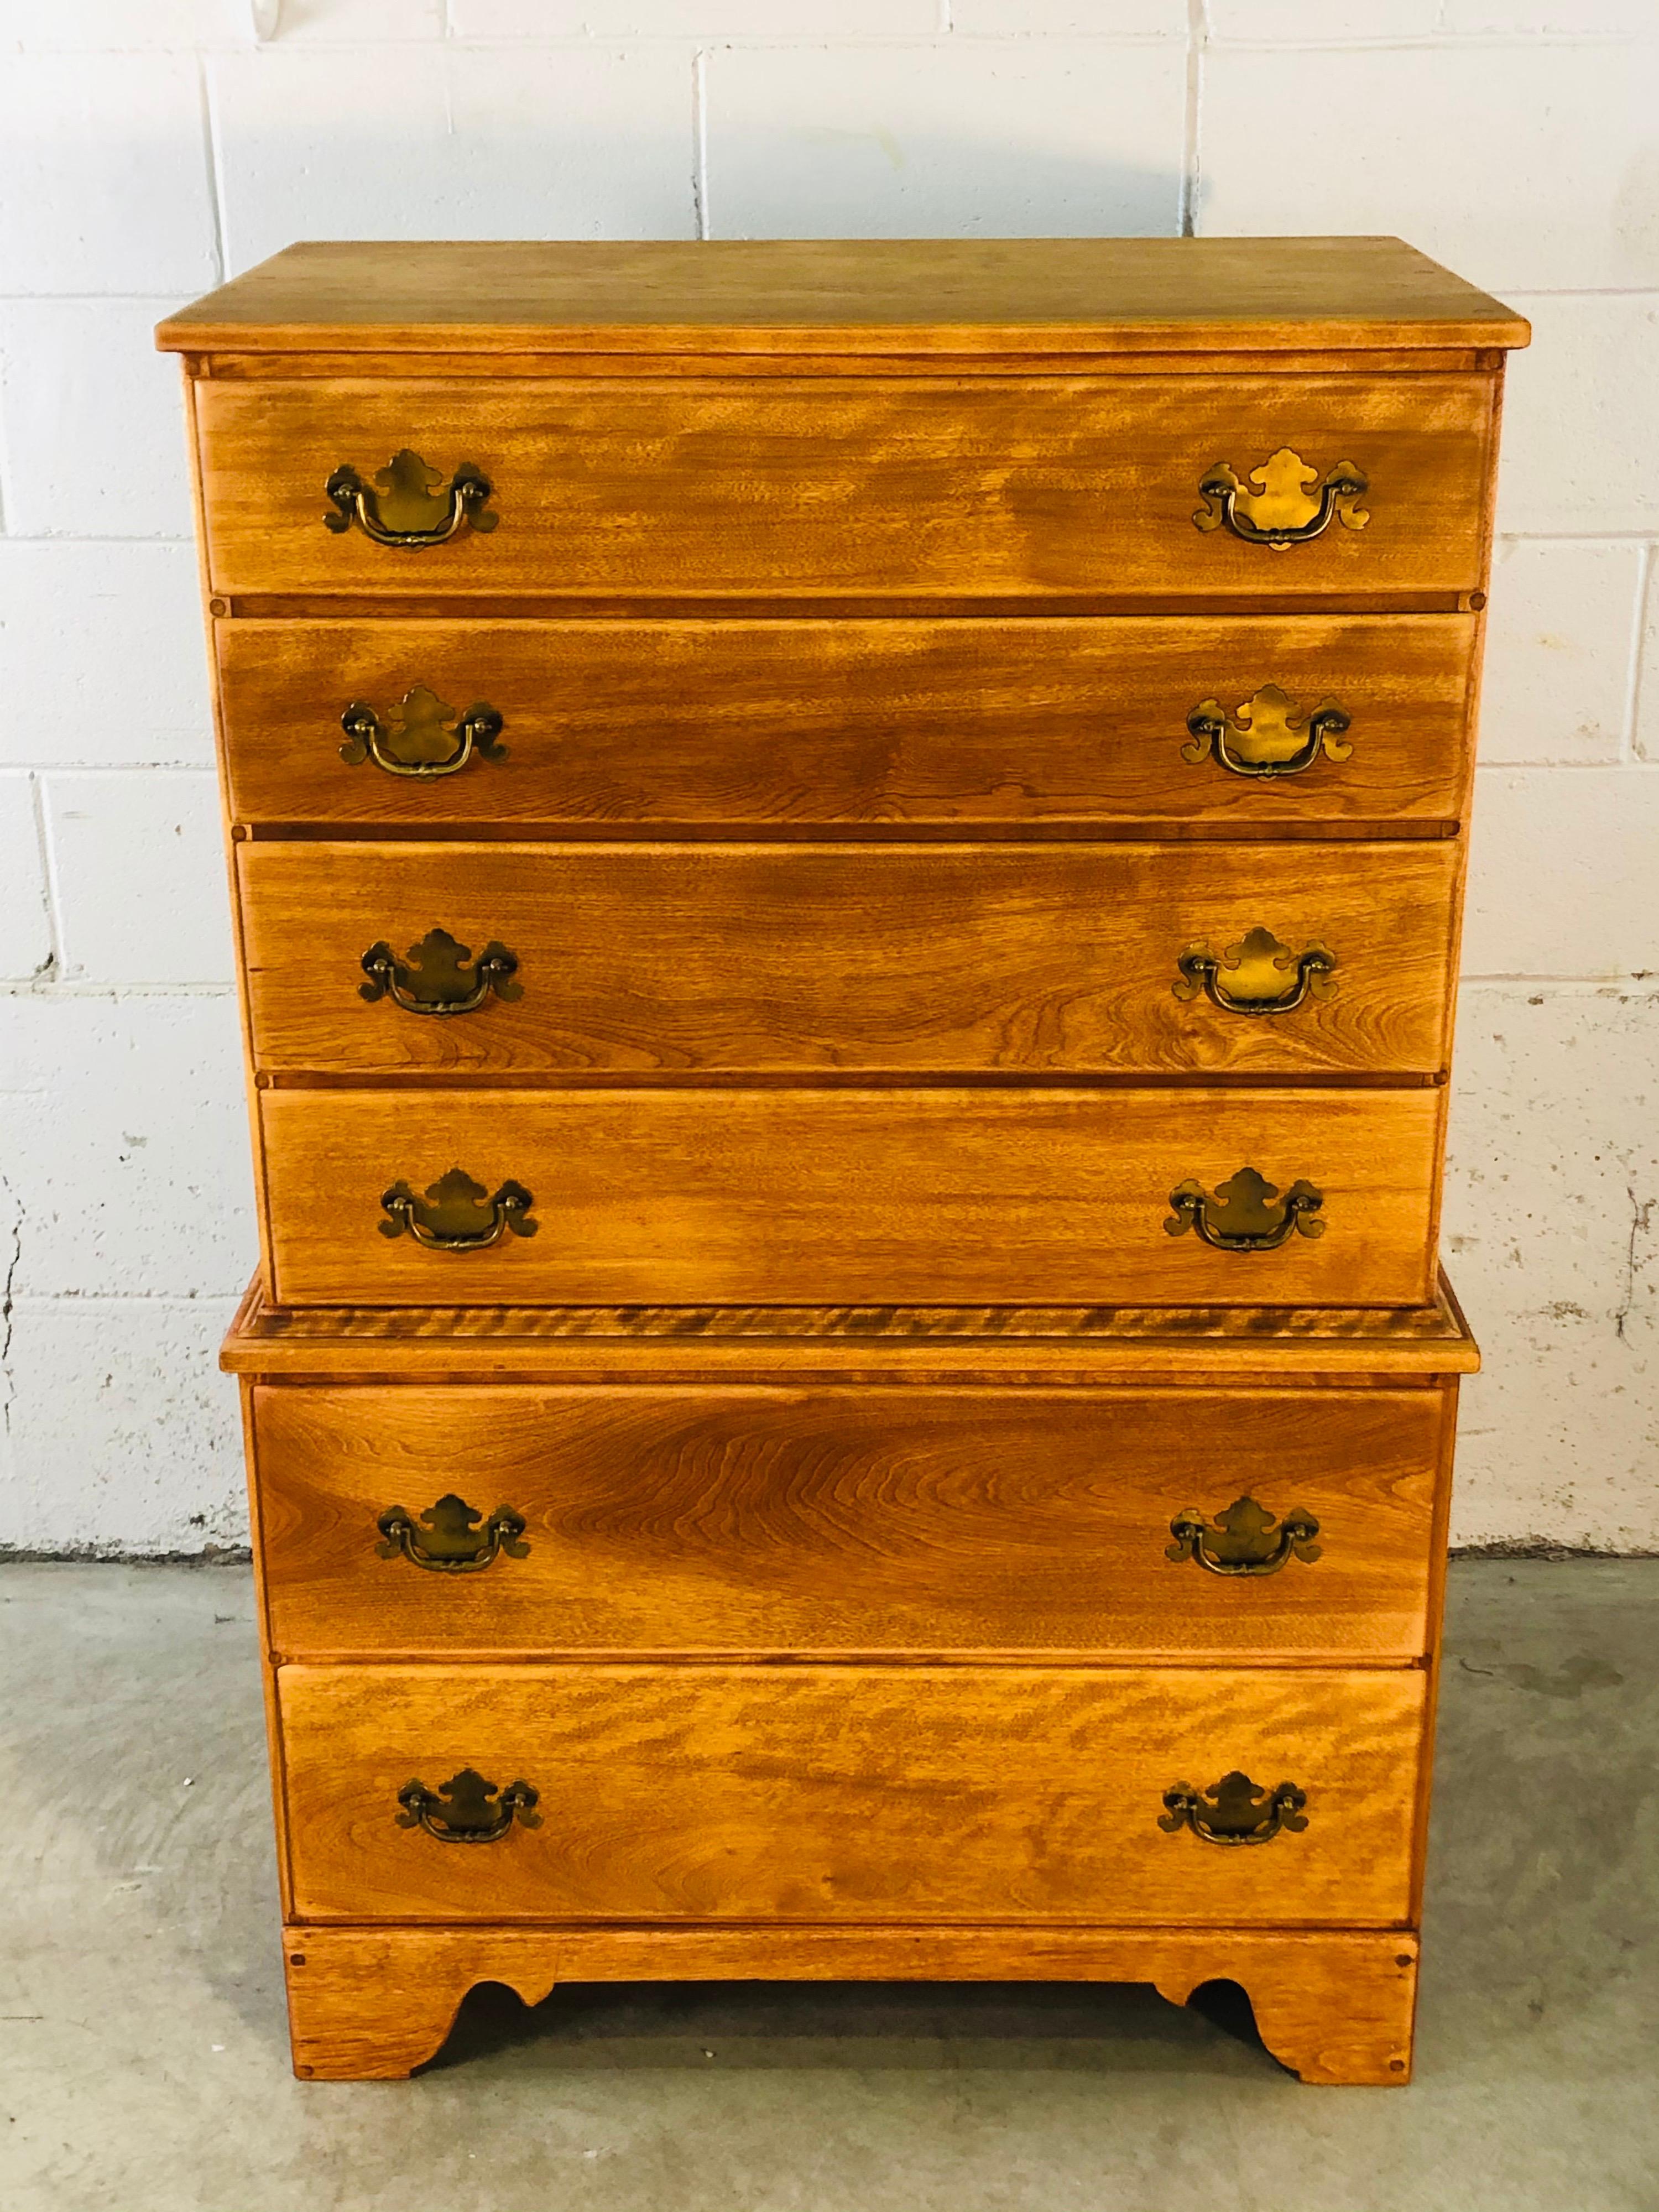 Vintage 1960s tall maple wood dresser by Baumritter - Ethan Allen. The dresser is from the Colonial series and has six drawers for storage. Drawers range from 4” to 7” in height. The drawers are brass and the dresser is marked in the drawer.